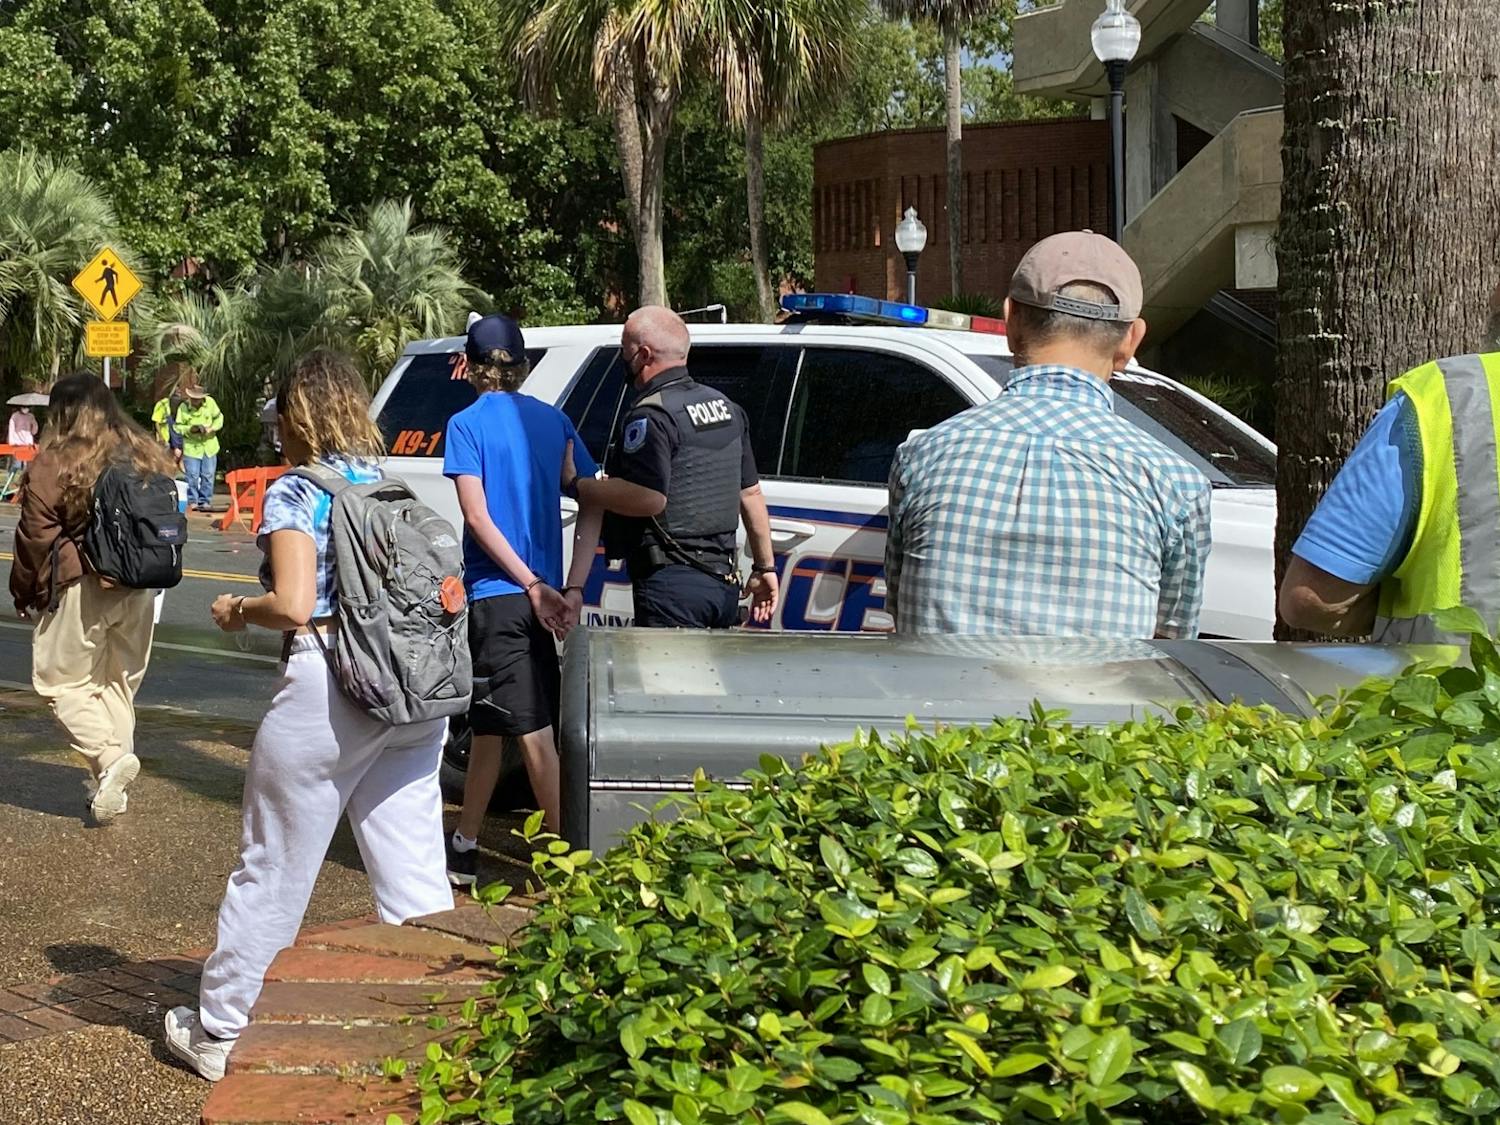 Joseph McDugald (middle), 18, UF freshman, is arrested by the University Police Department for refusing to leave an RTS bus in front of the Marston Science Library on Monday, Oct. 26, 2021. He was booked at the Alachua County Jail and released on Tuesday afternoon.